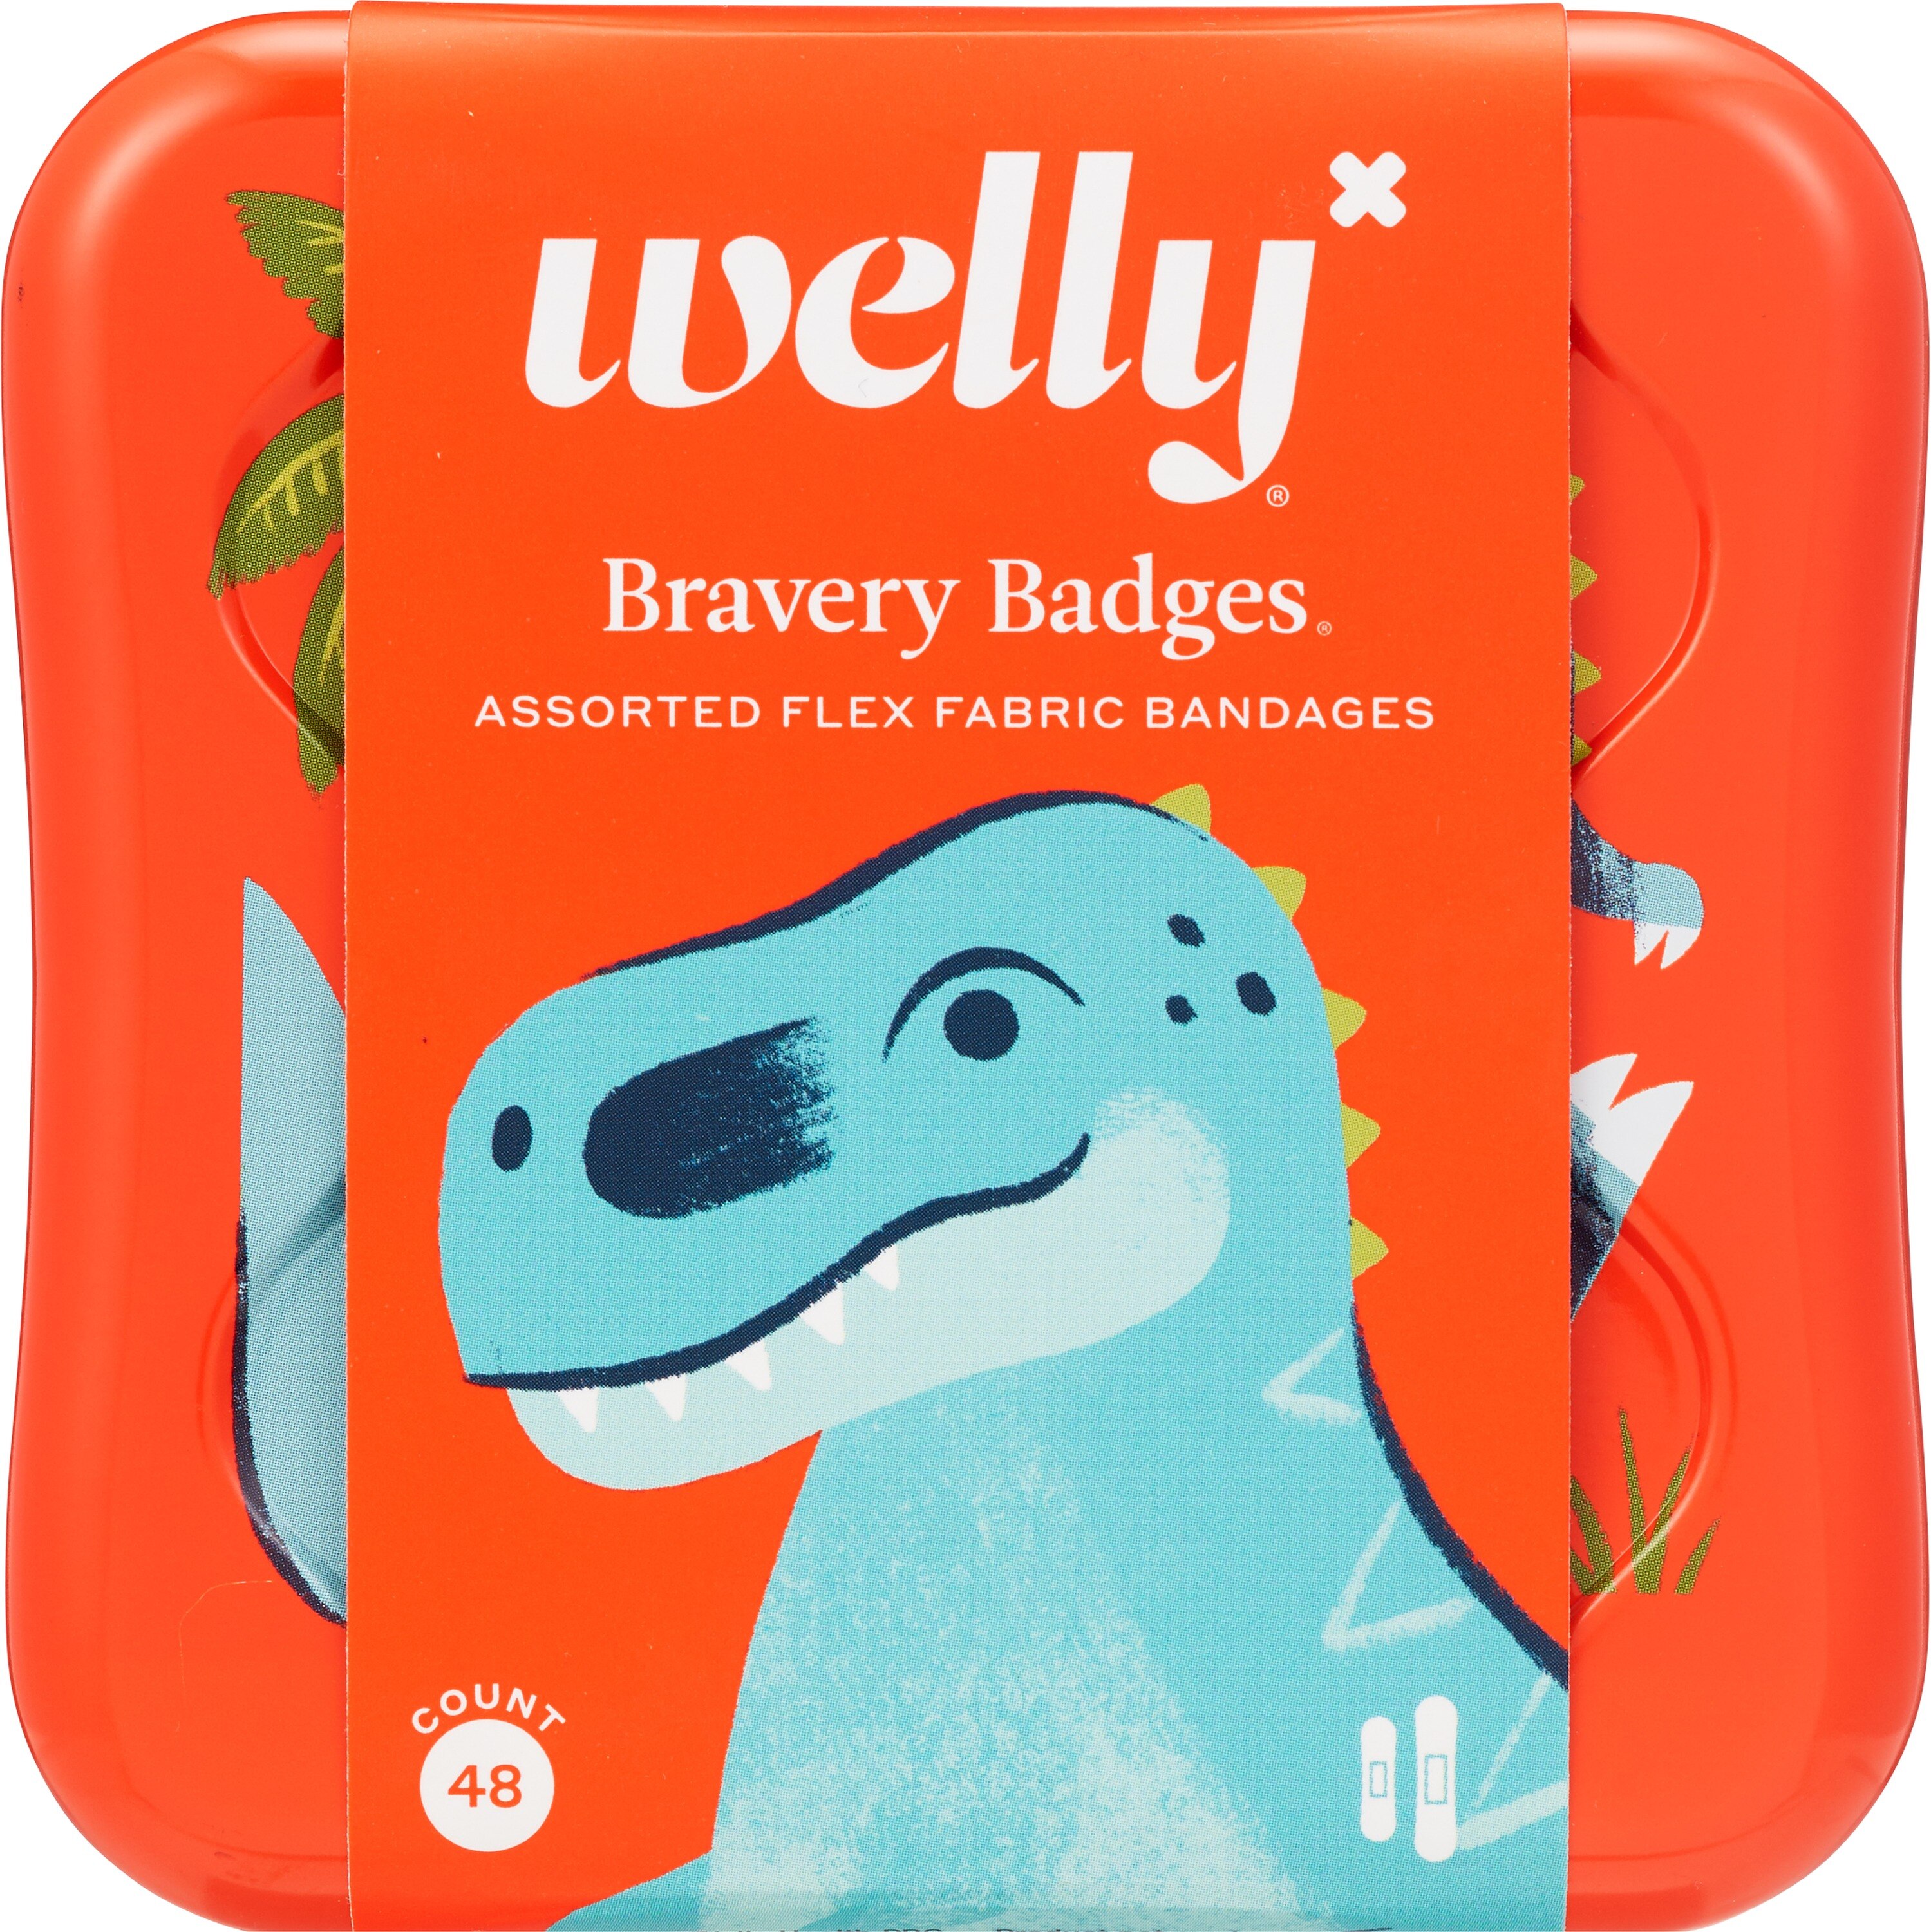 Welly Kids Rainbow Bravery Badges Kit, Assorted, 48 CT